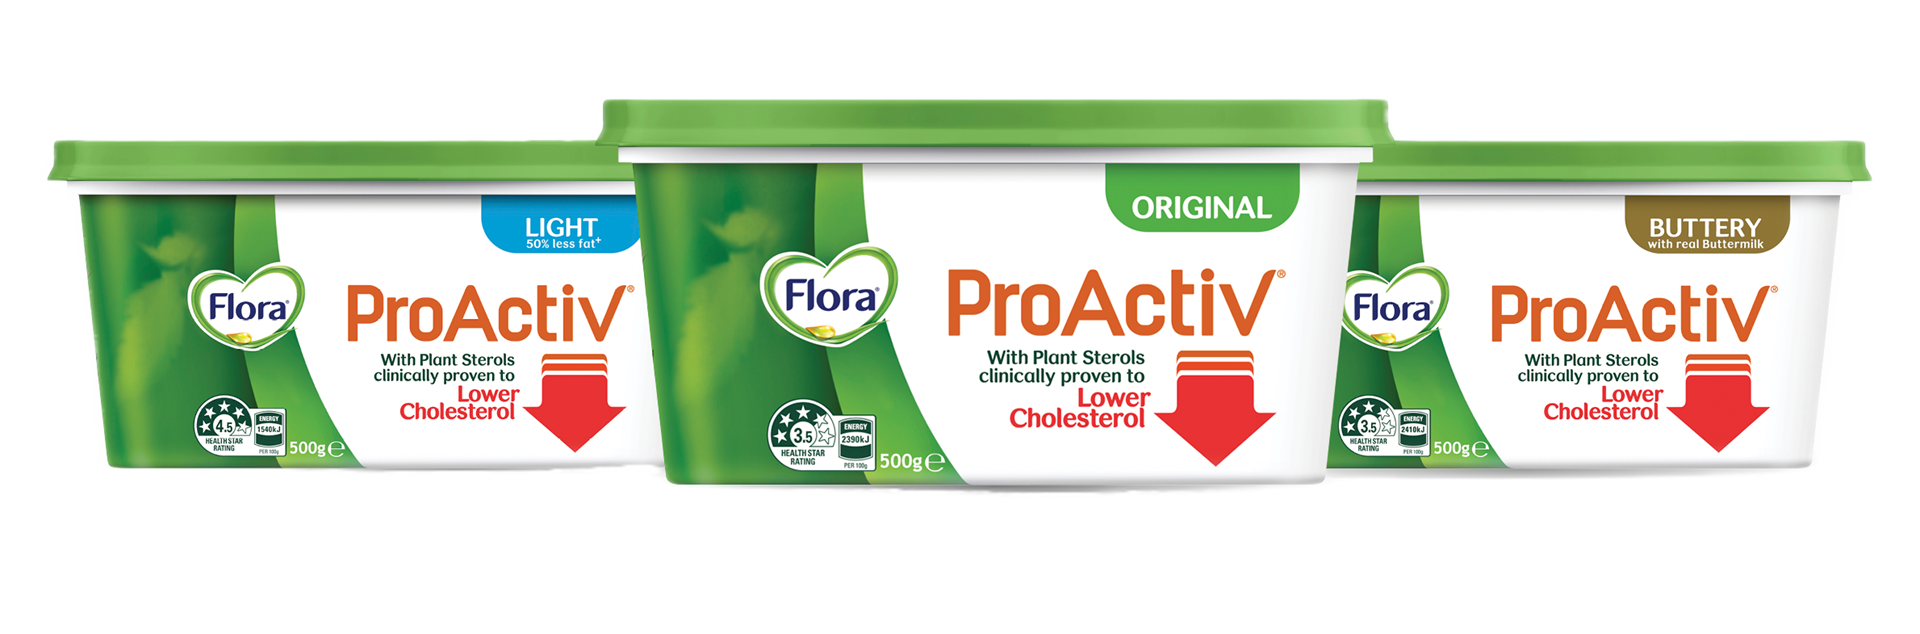 flora proactiv products overview